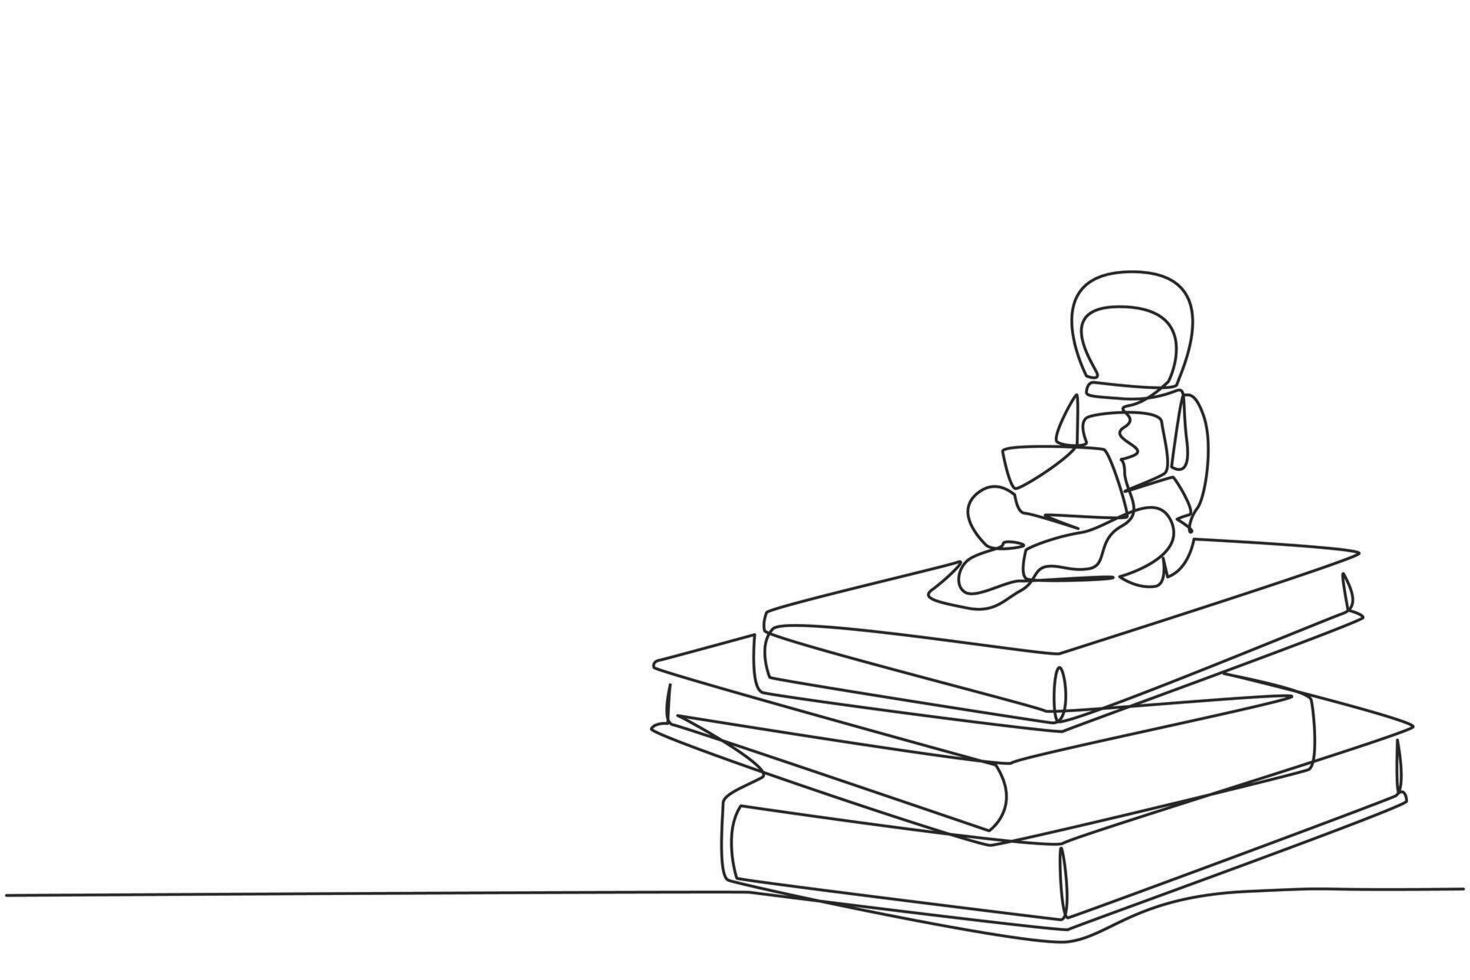 Single one line drawing young energetic astronaut sitting on stack of giant books typing laptop. Expedition problem in the database. Galaxy cosmic outer space. Continuous line graphic illustration vector